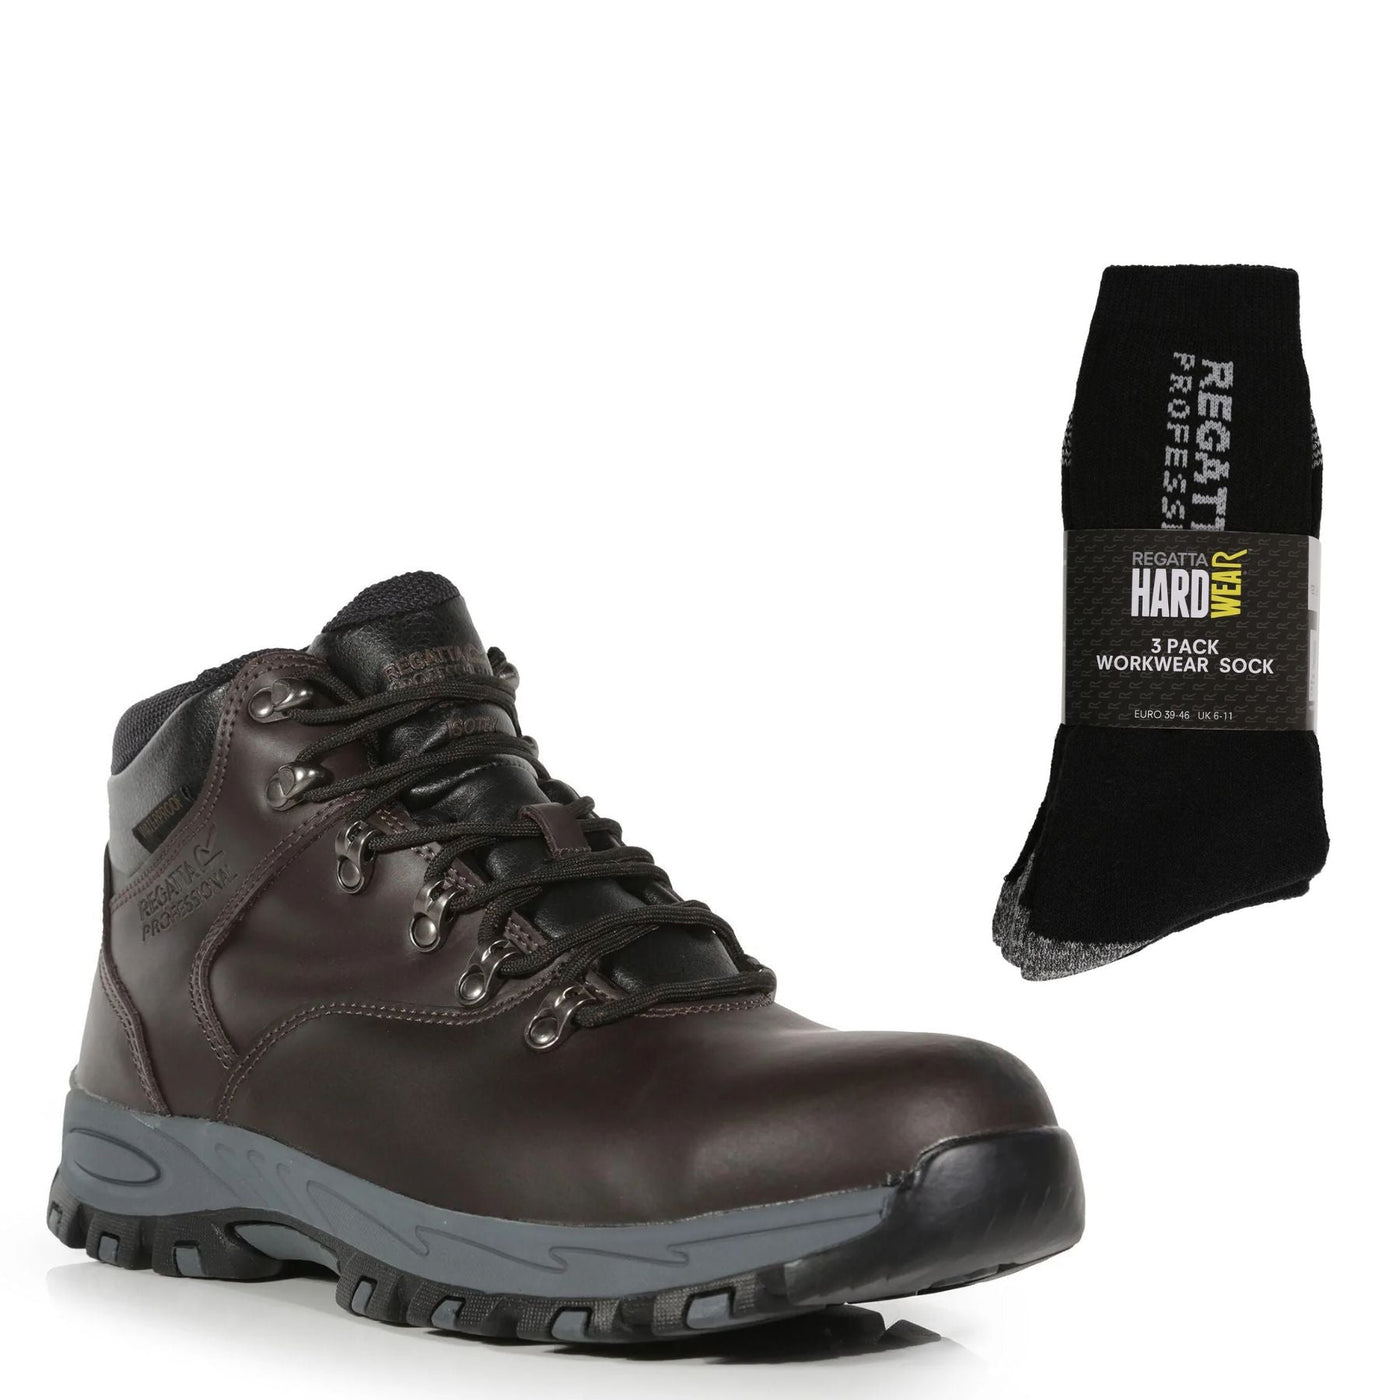 Regatta Professional Special Offer Pack - Gritstone Safety Hiker Boots + 3 Pairs Work Socks